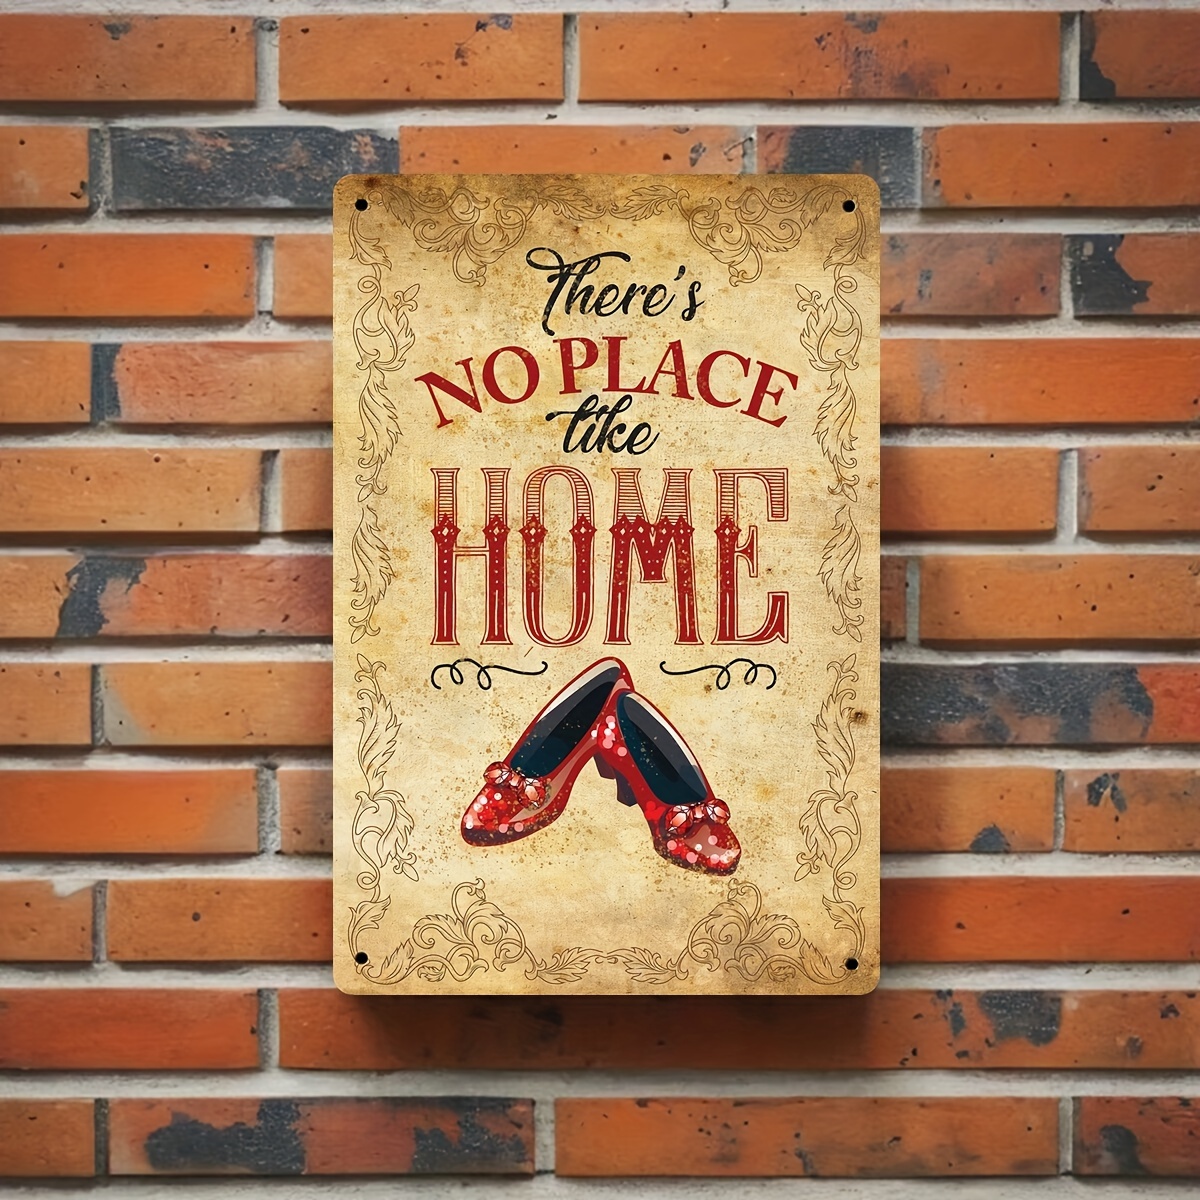 Vintage "There's No Place Like Home" Metal Tin Sign Wall Decor - Iron Retro Plaque for Room, Restaurant, Cafe, Man Cave, Bar, Farmhouse, Garage - 8" x 12" Decorative Warning Sign